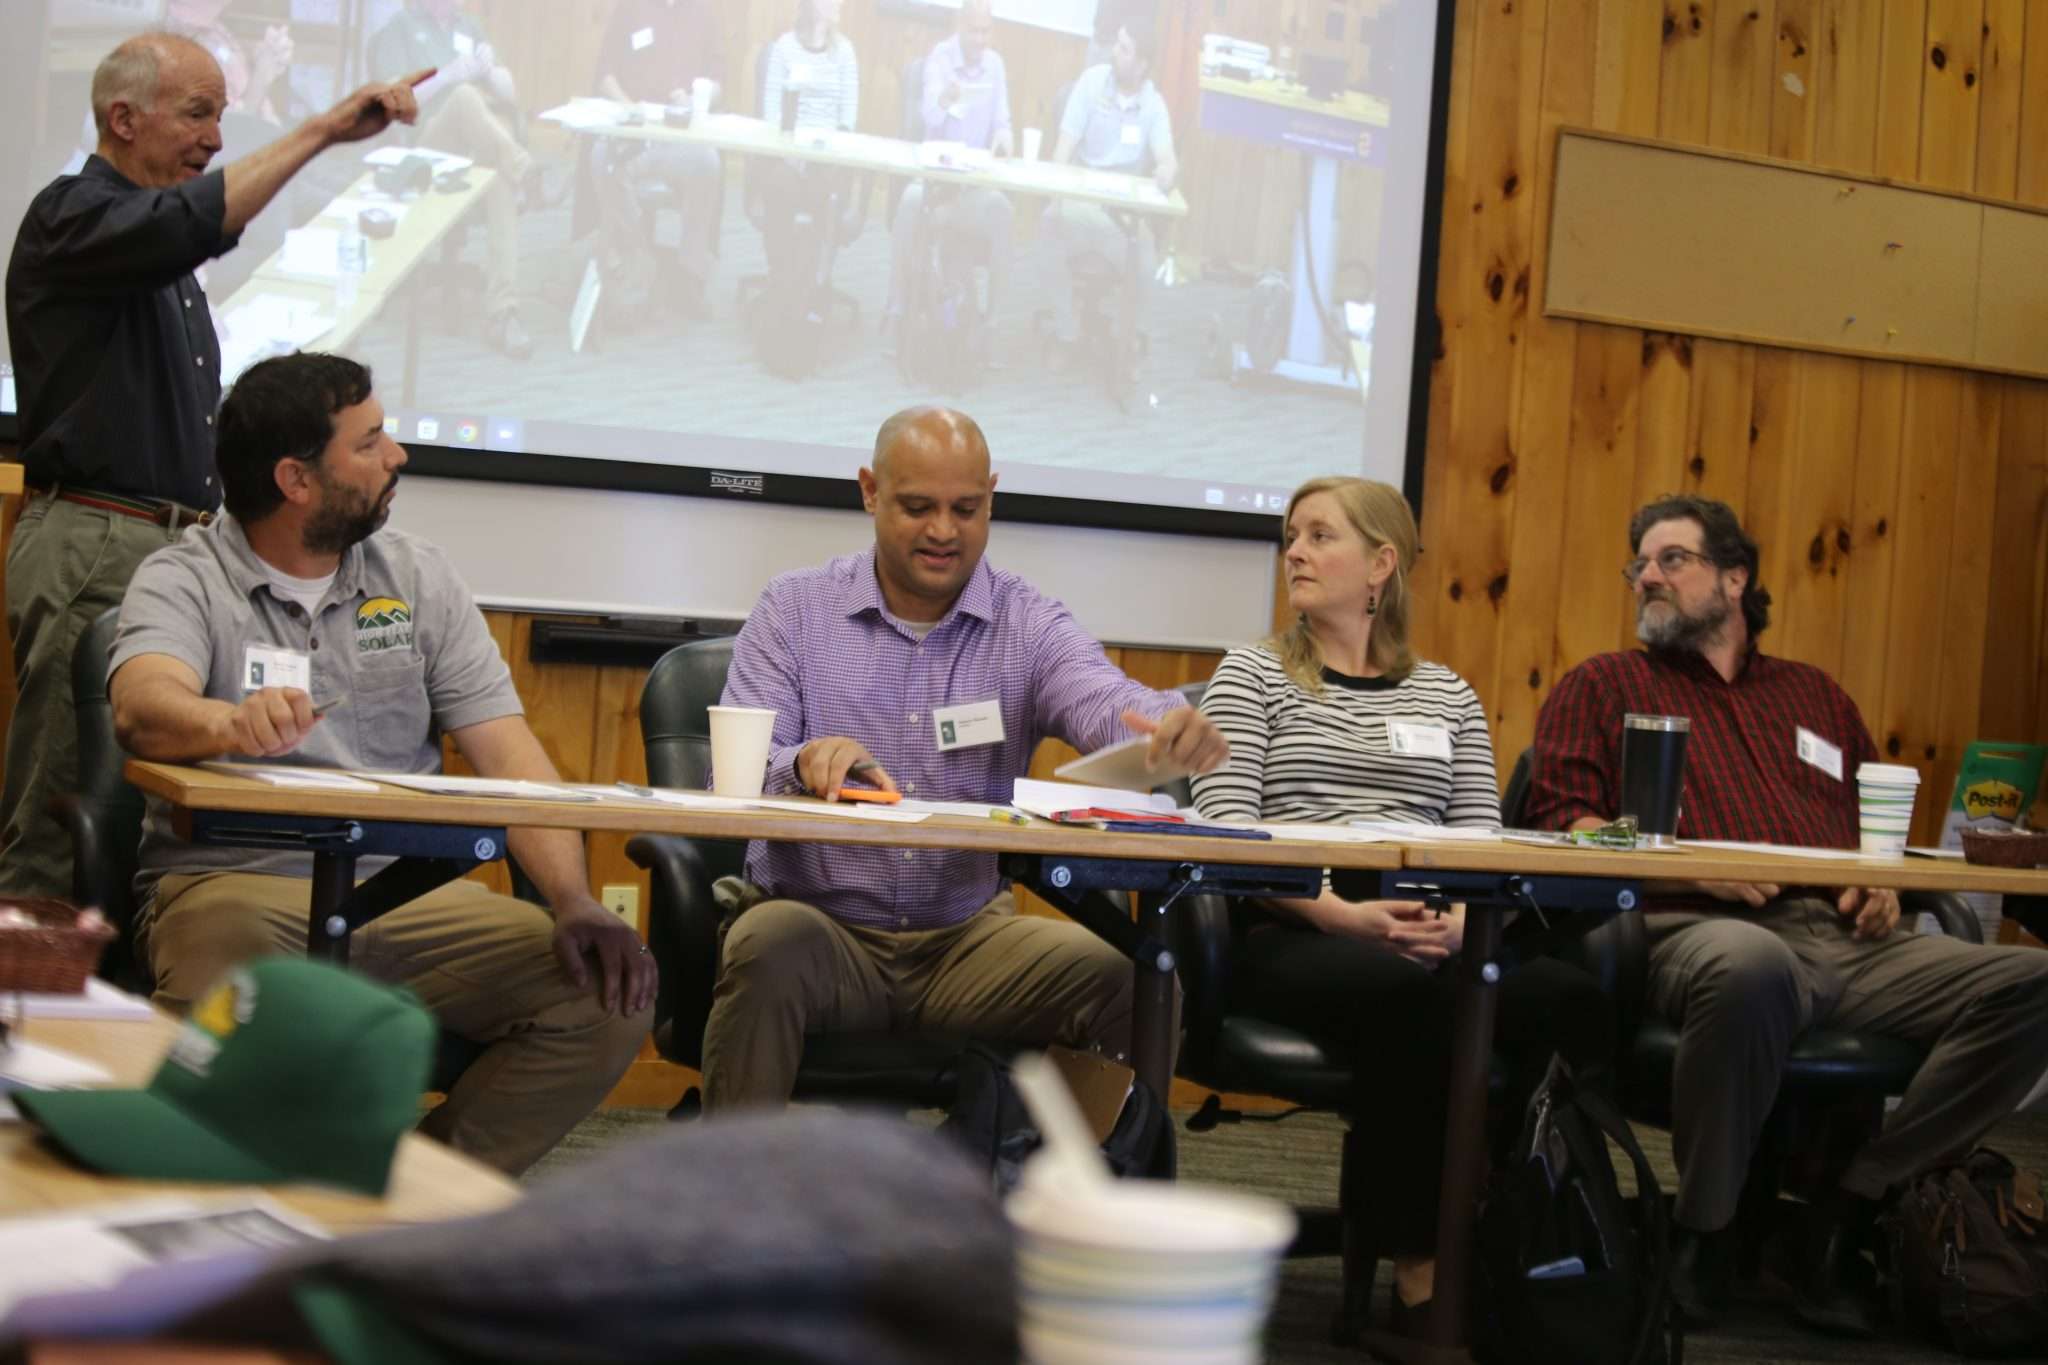 Panelists speak about the transition to renewable energy on Saturday before the Adirondack Landowners Association at a meeting in Blue Mountain Lake.